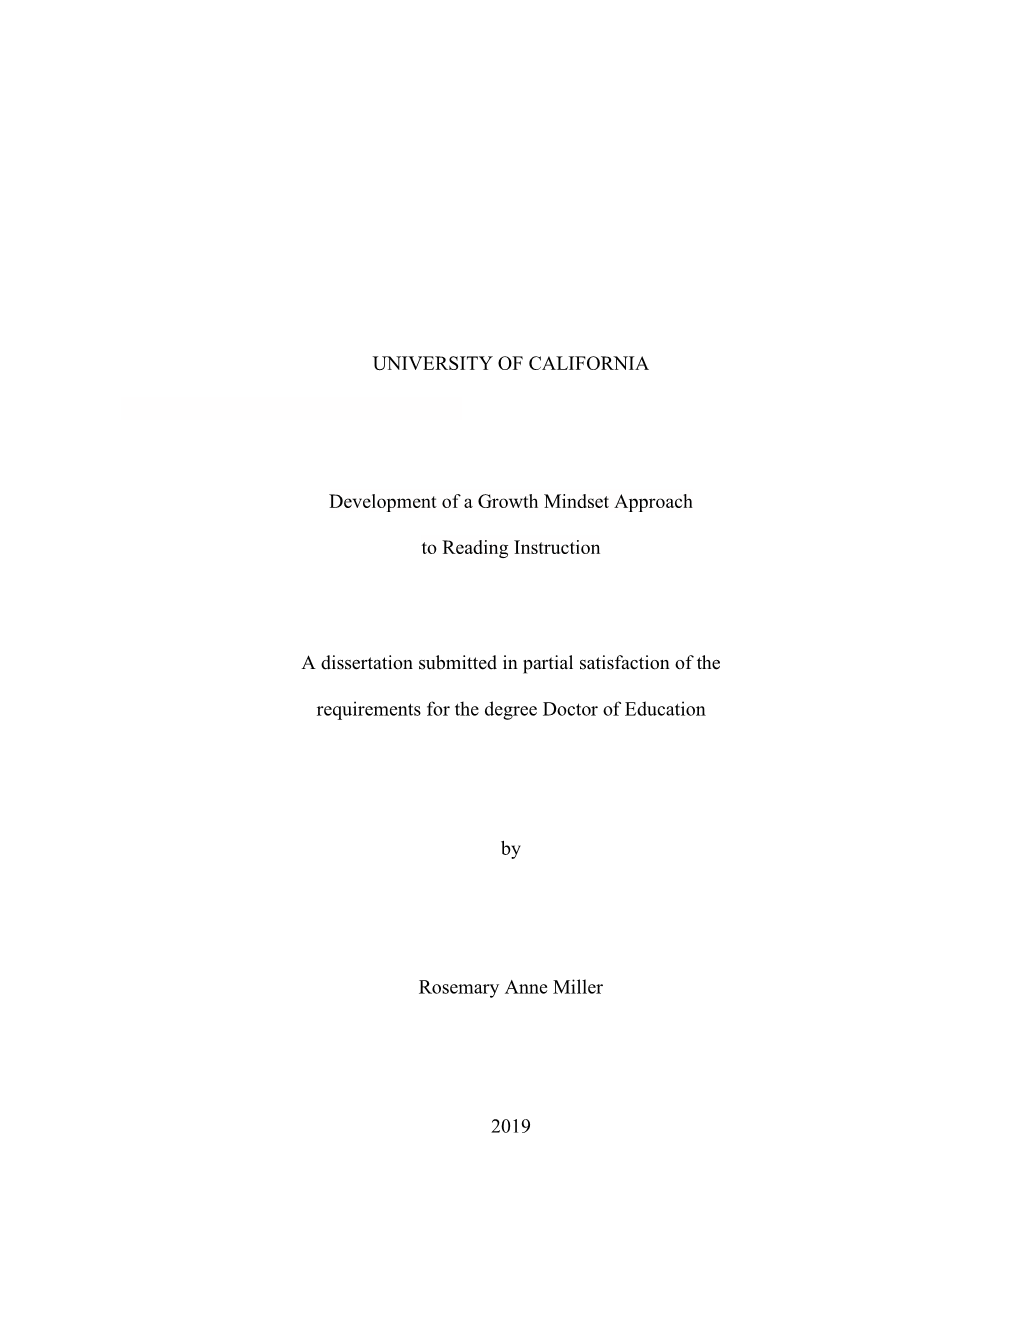 UNIVERSITY of CALIFORNIA Development of a Growth Mindset Approach to Reading Instruction a Dissertation Submitted in Partial